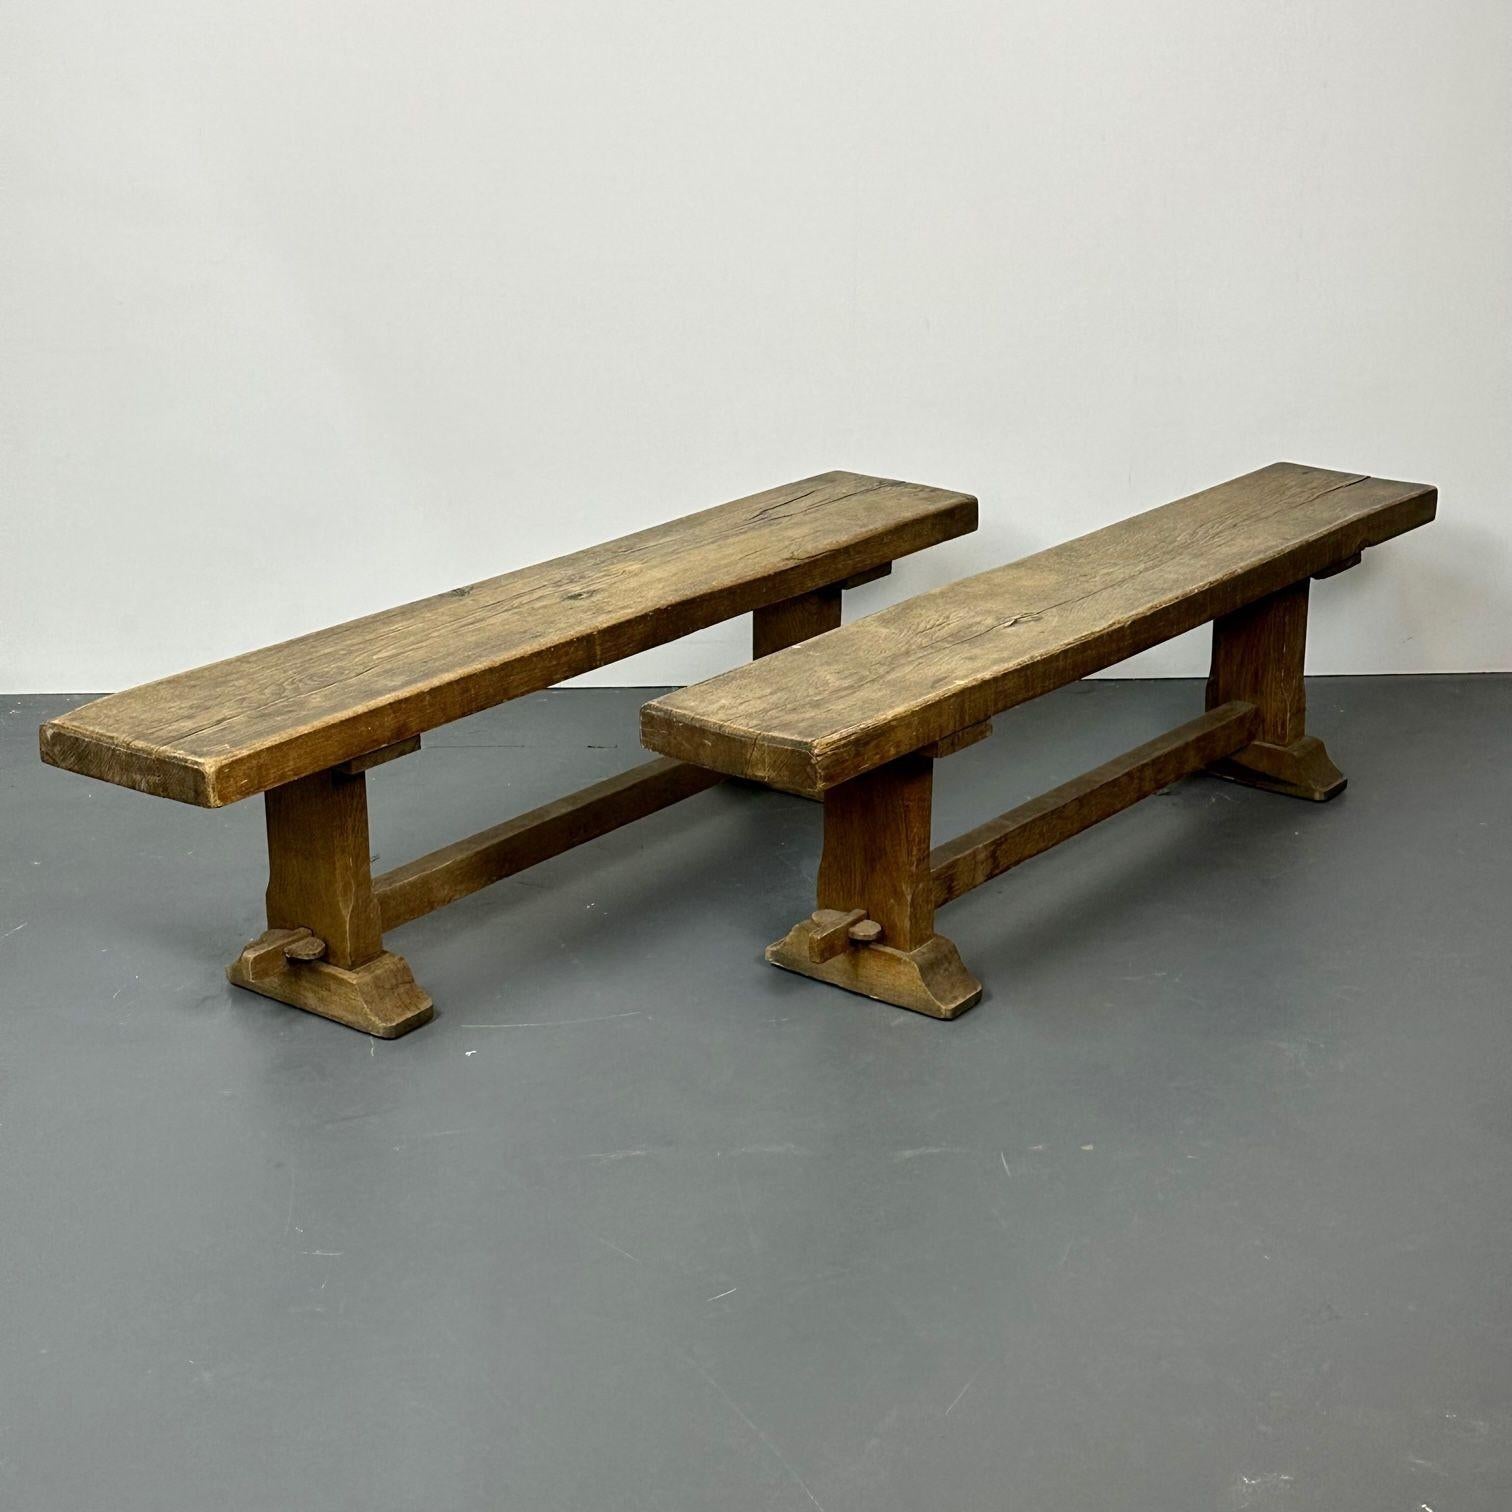 Pair of Provincial French Mid-Century Modern Patinated Elm benches, Farmhouse

Beautifully patinated elm wood on this pair of provincial pre mid-century French benches.

A stunning example to place around any farm table or modern eating area.